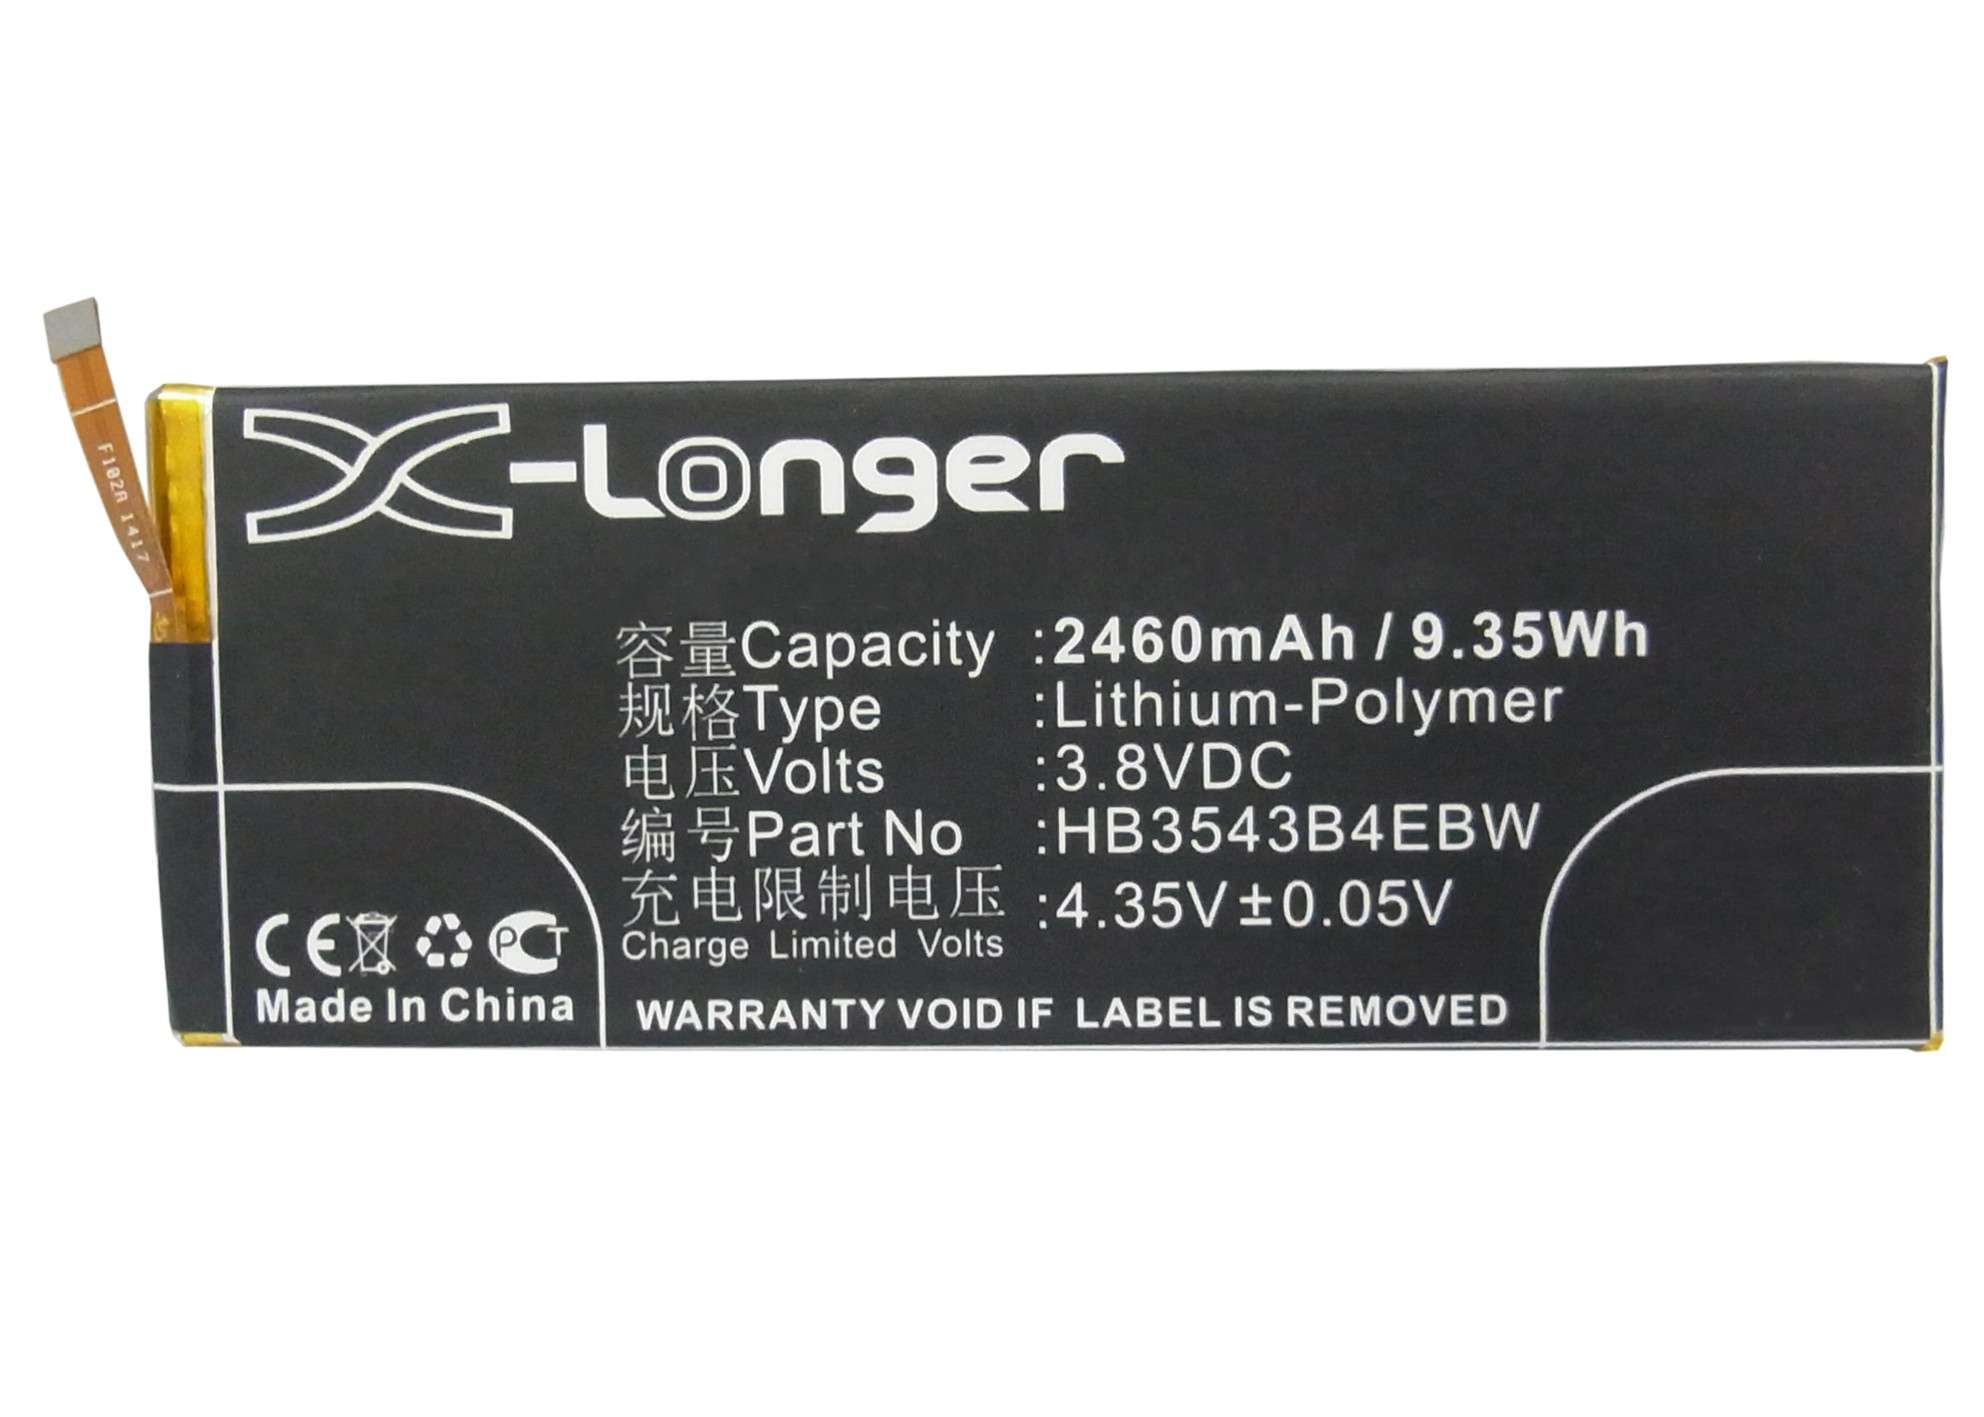 Synergy Digital Battery Compatible With Huawei HB3543B4EBW Cellphone Battery - (Li-Pol, 3.8V, 2460 mAh / 9.35Wh)